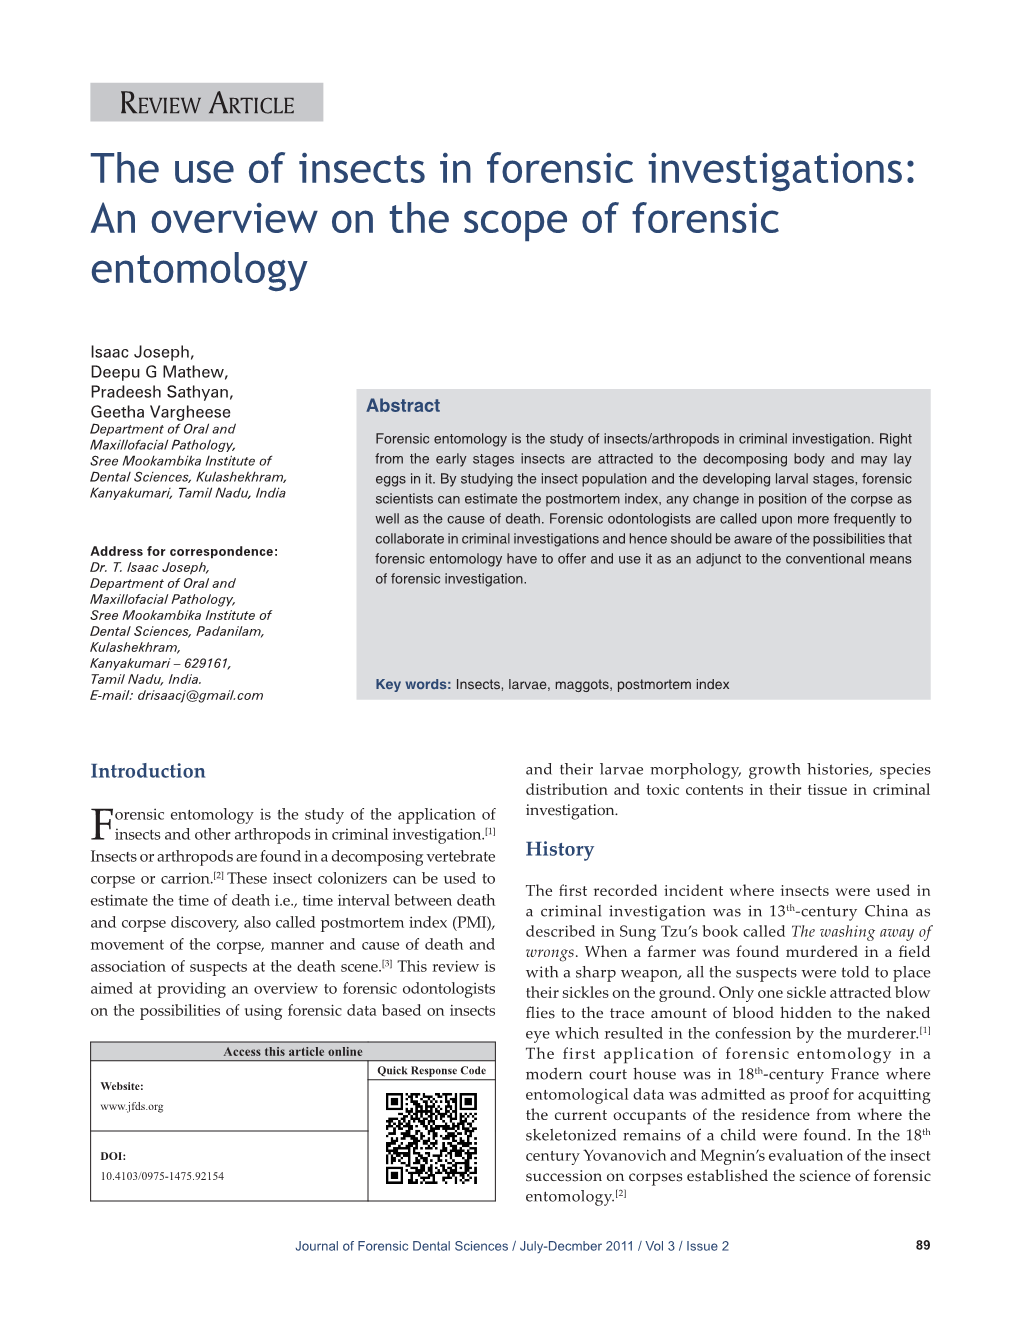 The Use of Insects in Forensic Investigations: an Overview on the Scope of Forensic Entomology